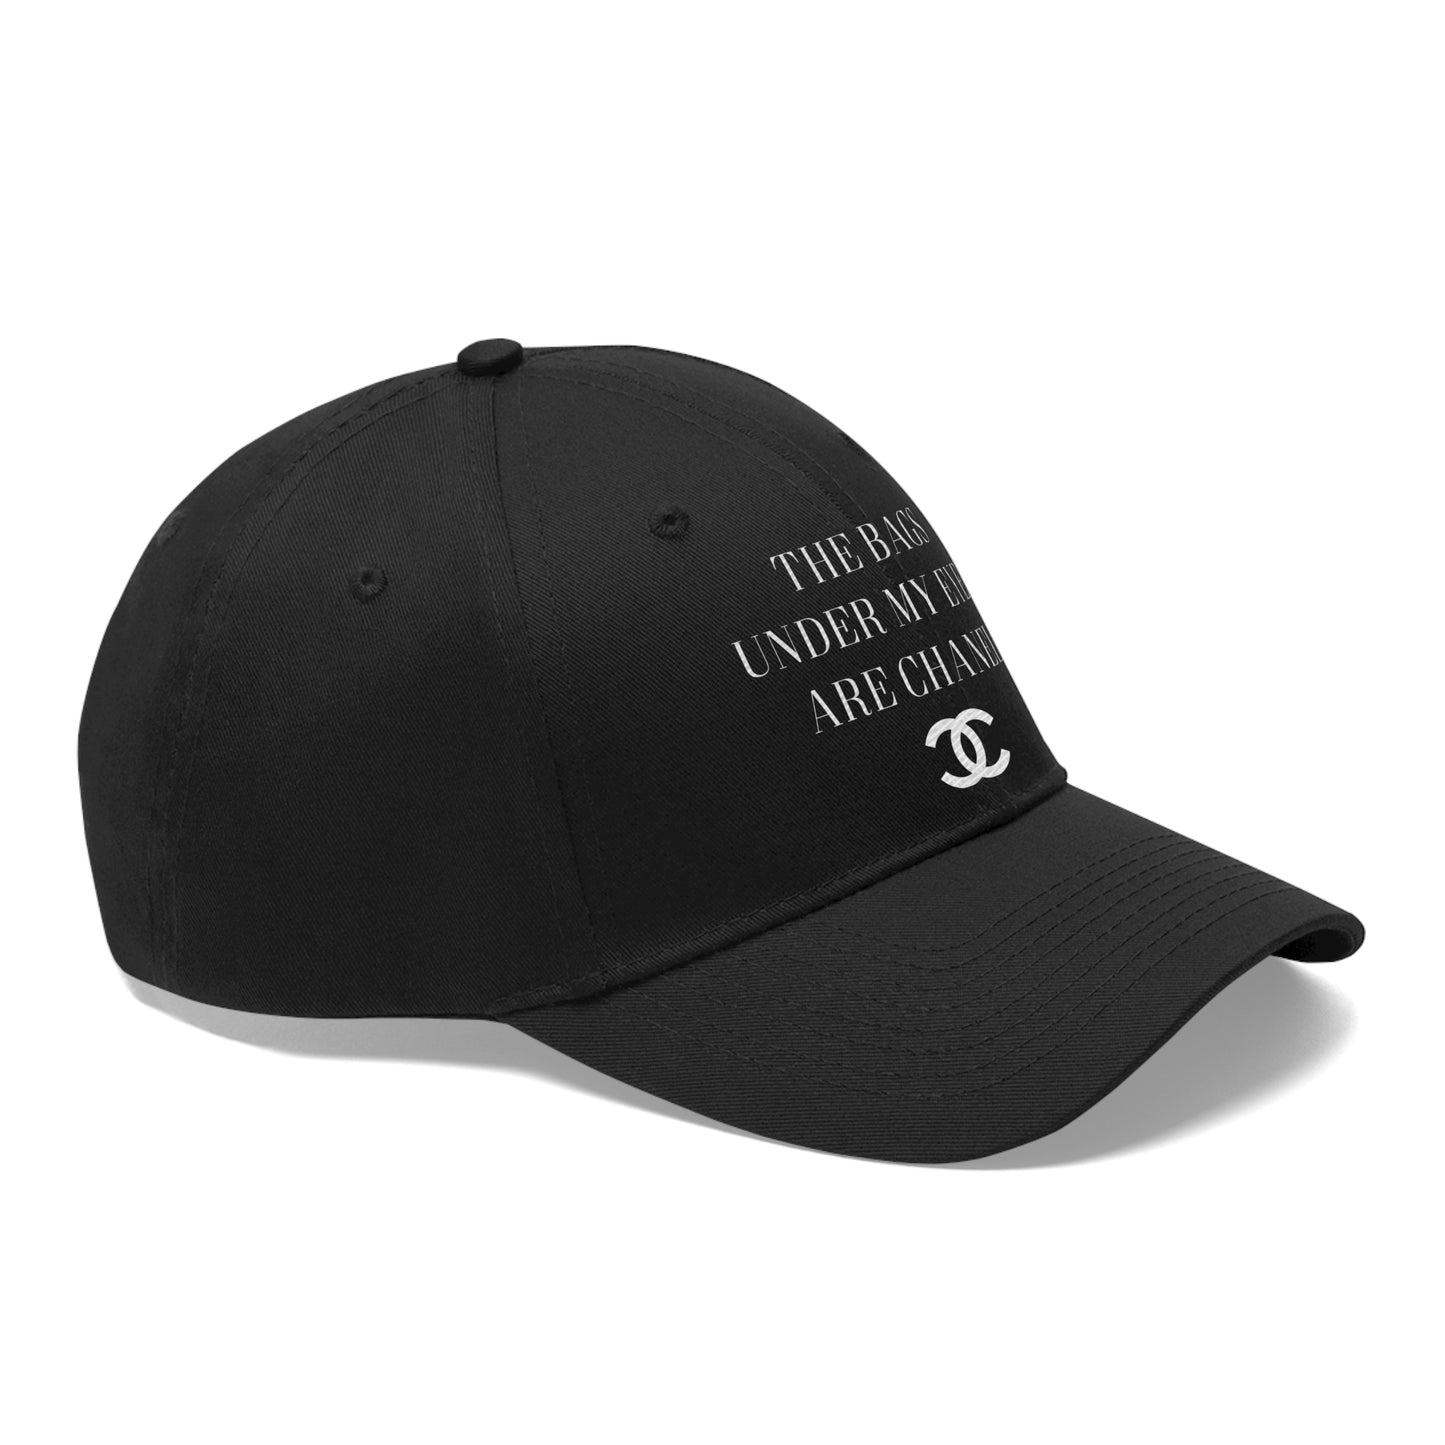 The Bags Under My Eyes Unisex Twill Hat